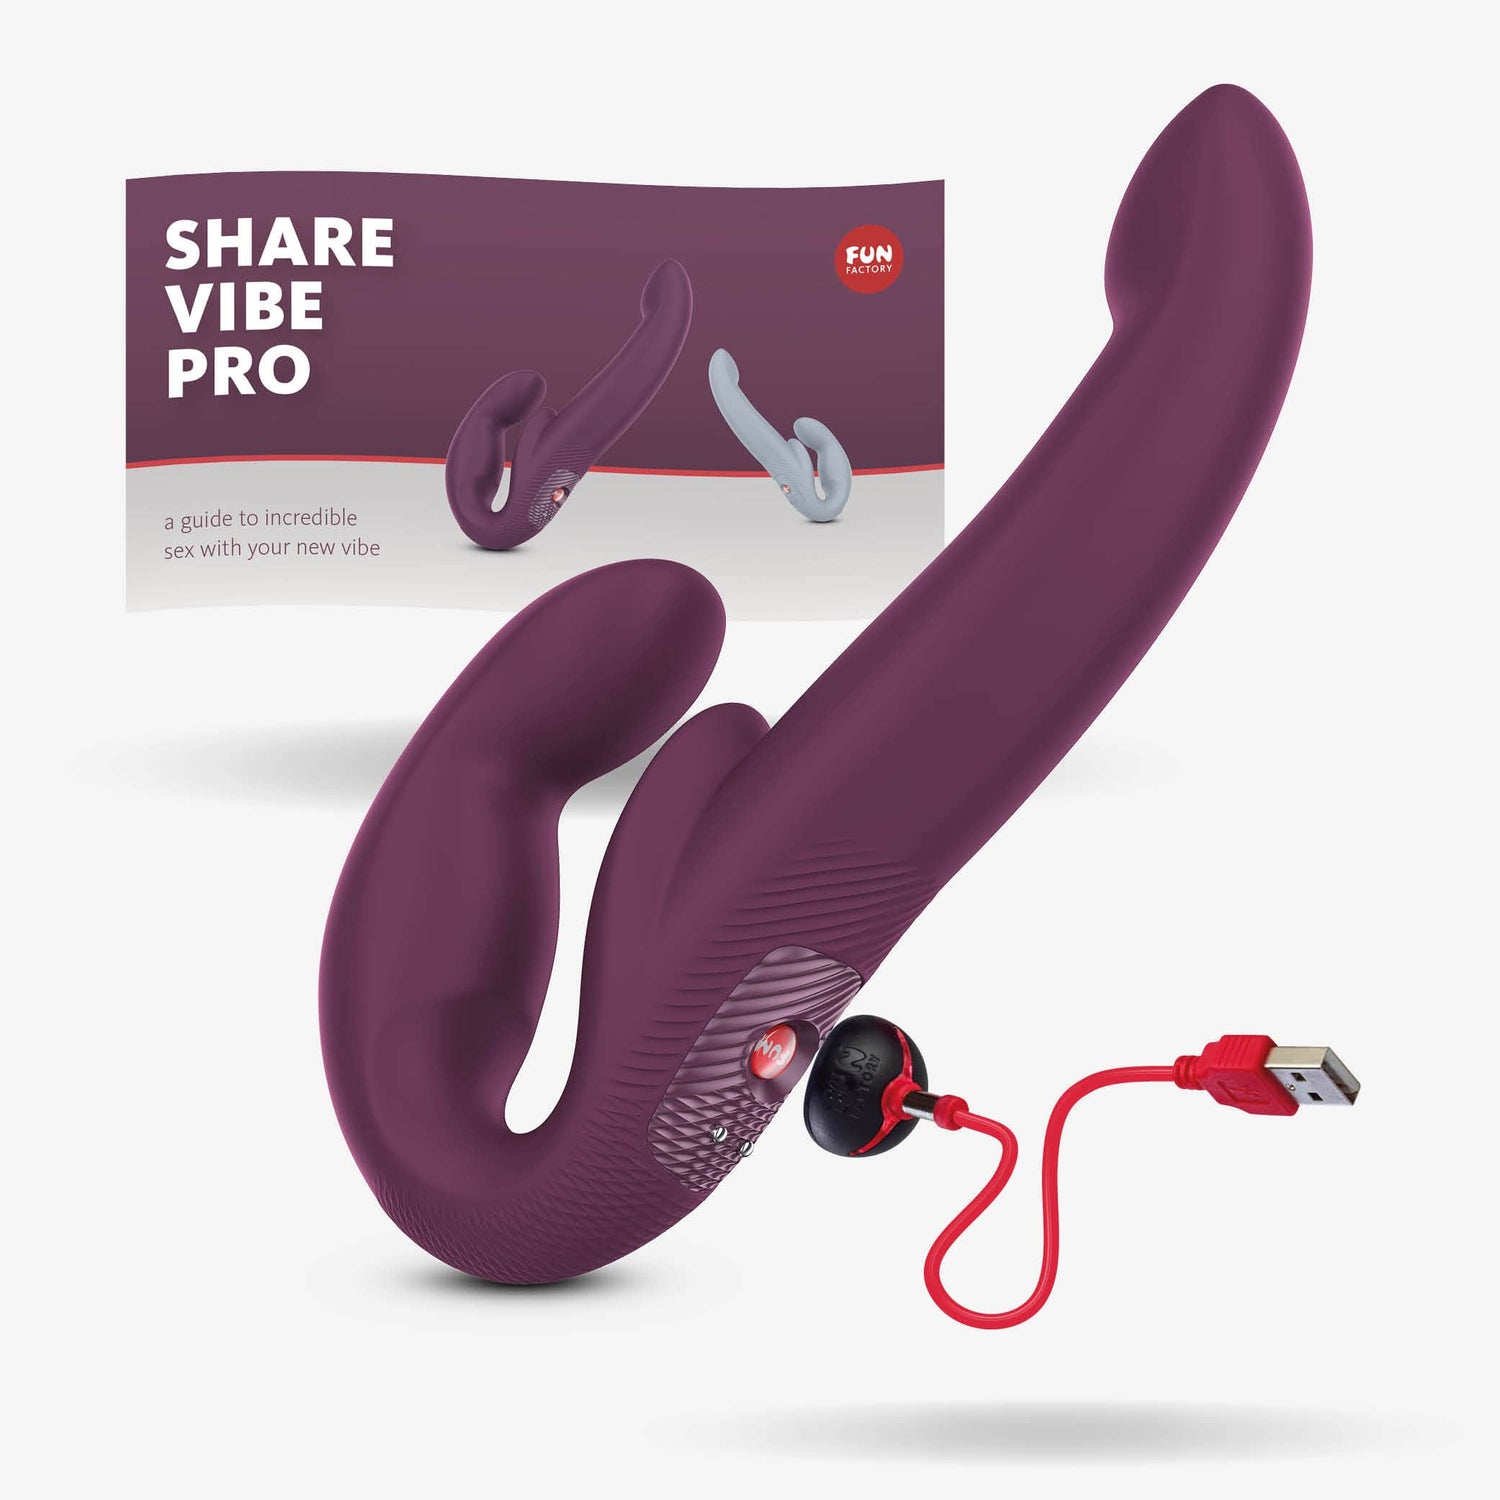 Share Vibe Pro double dildo with the charger and user manual on a grey background